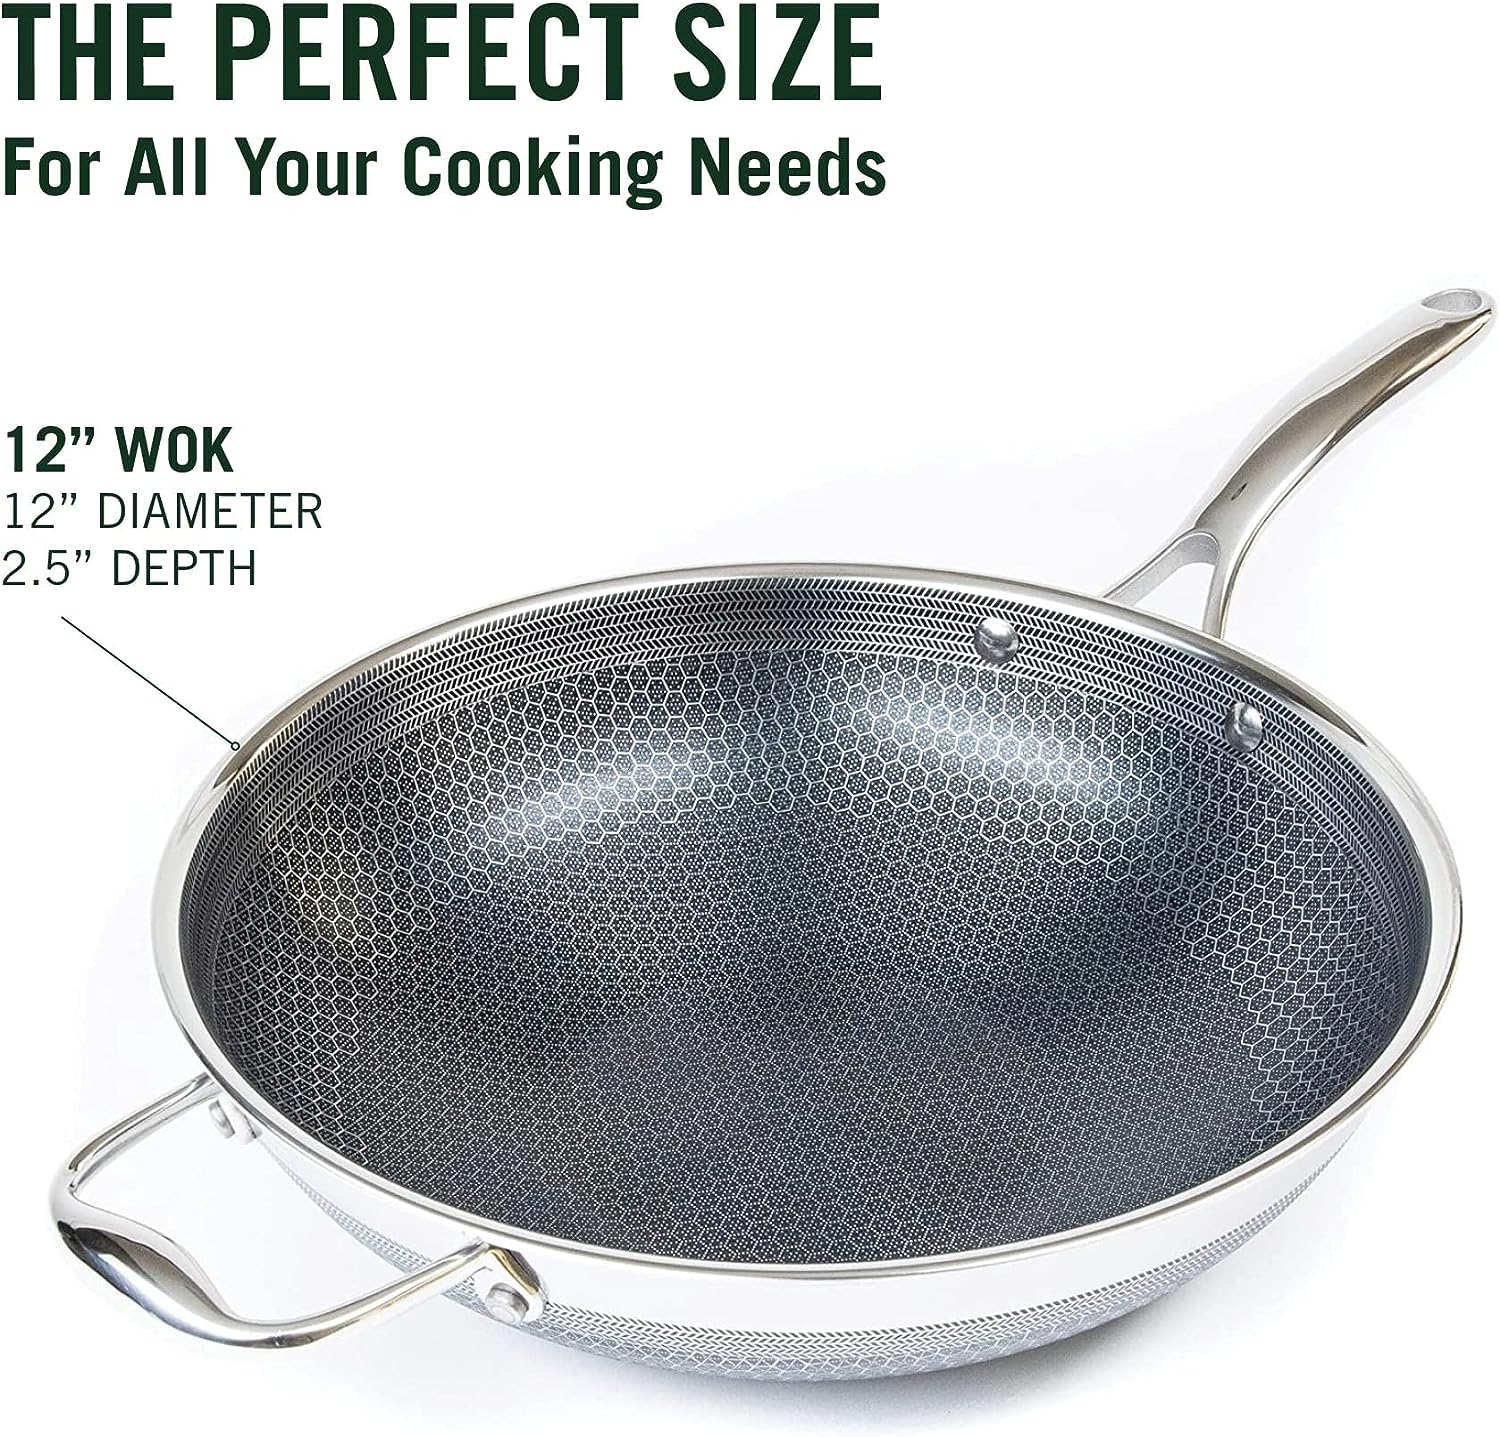 HexClad 12 Inch Hybrid Nonstick Wok, Dishwasher and Oven Friendly,  Compatible with All Cooktops